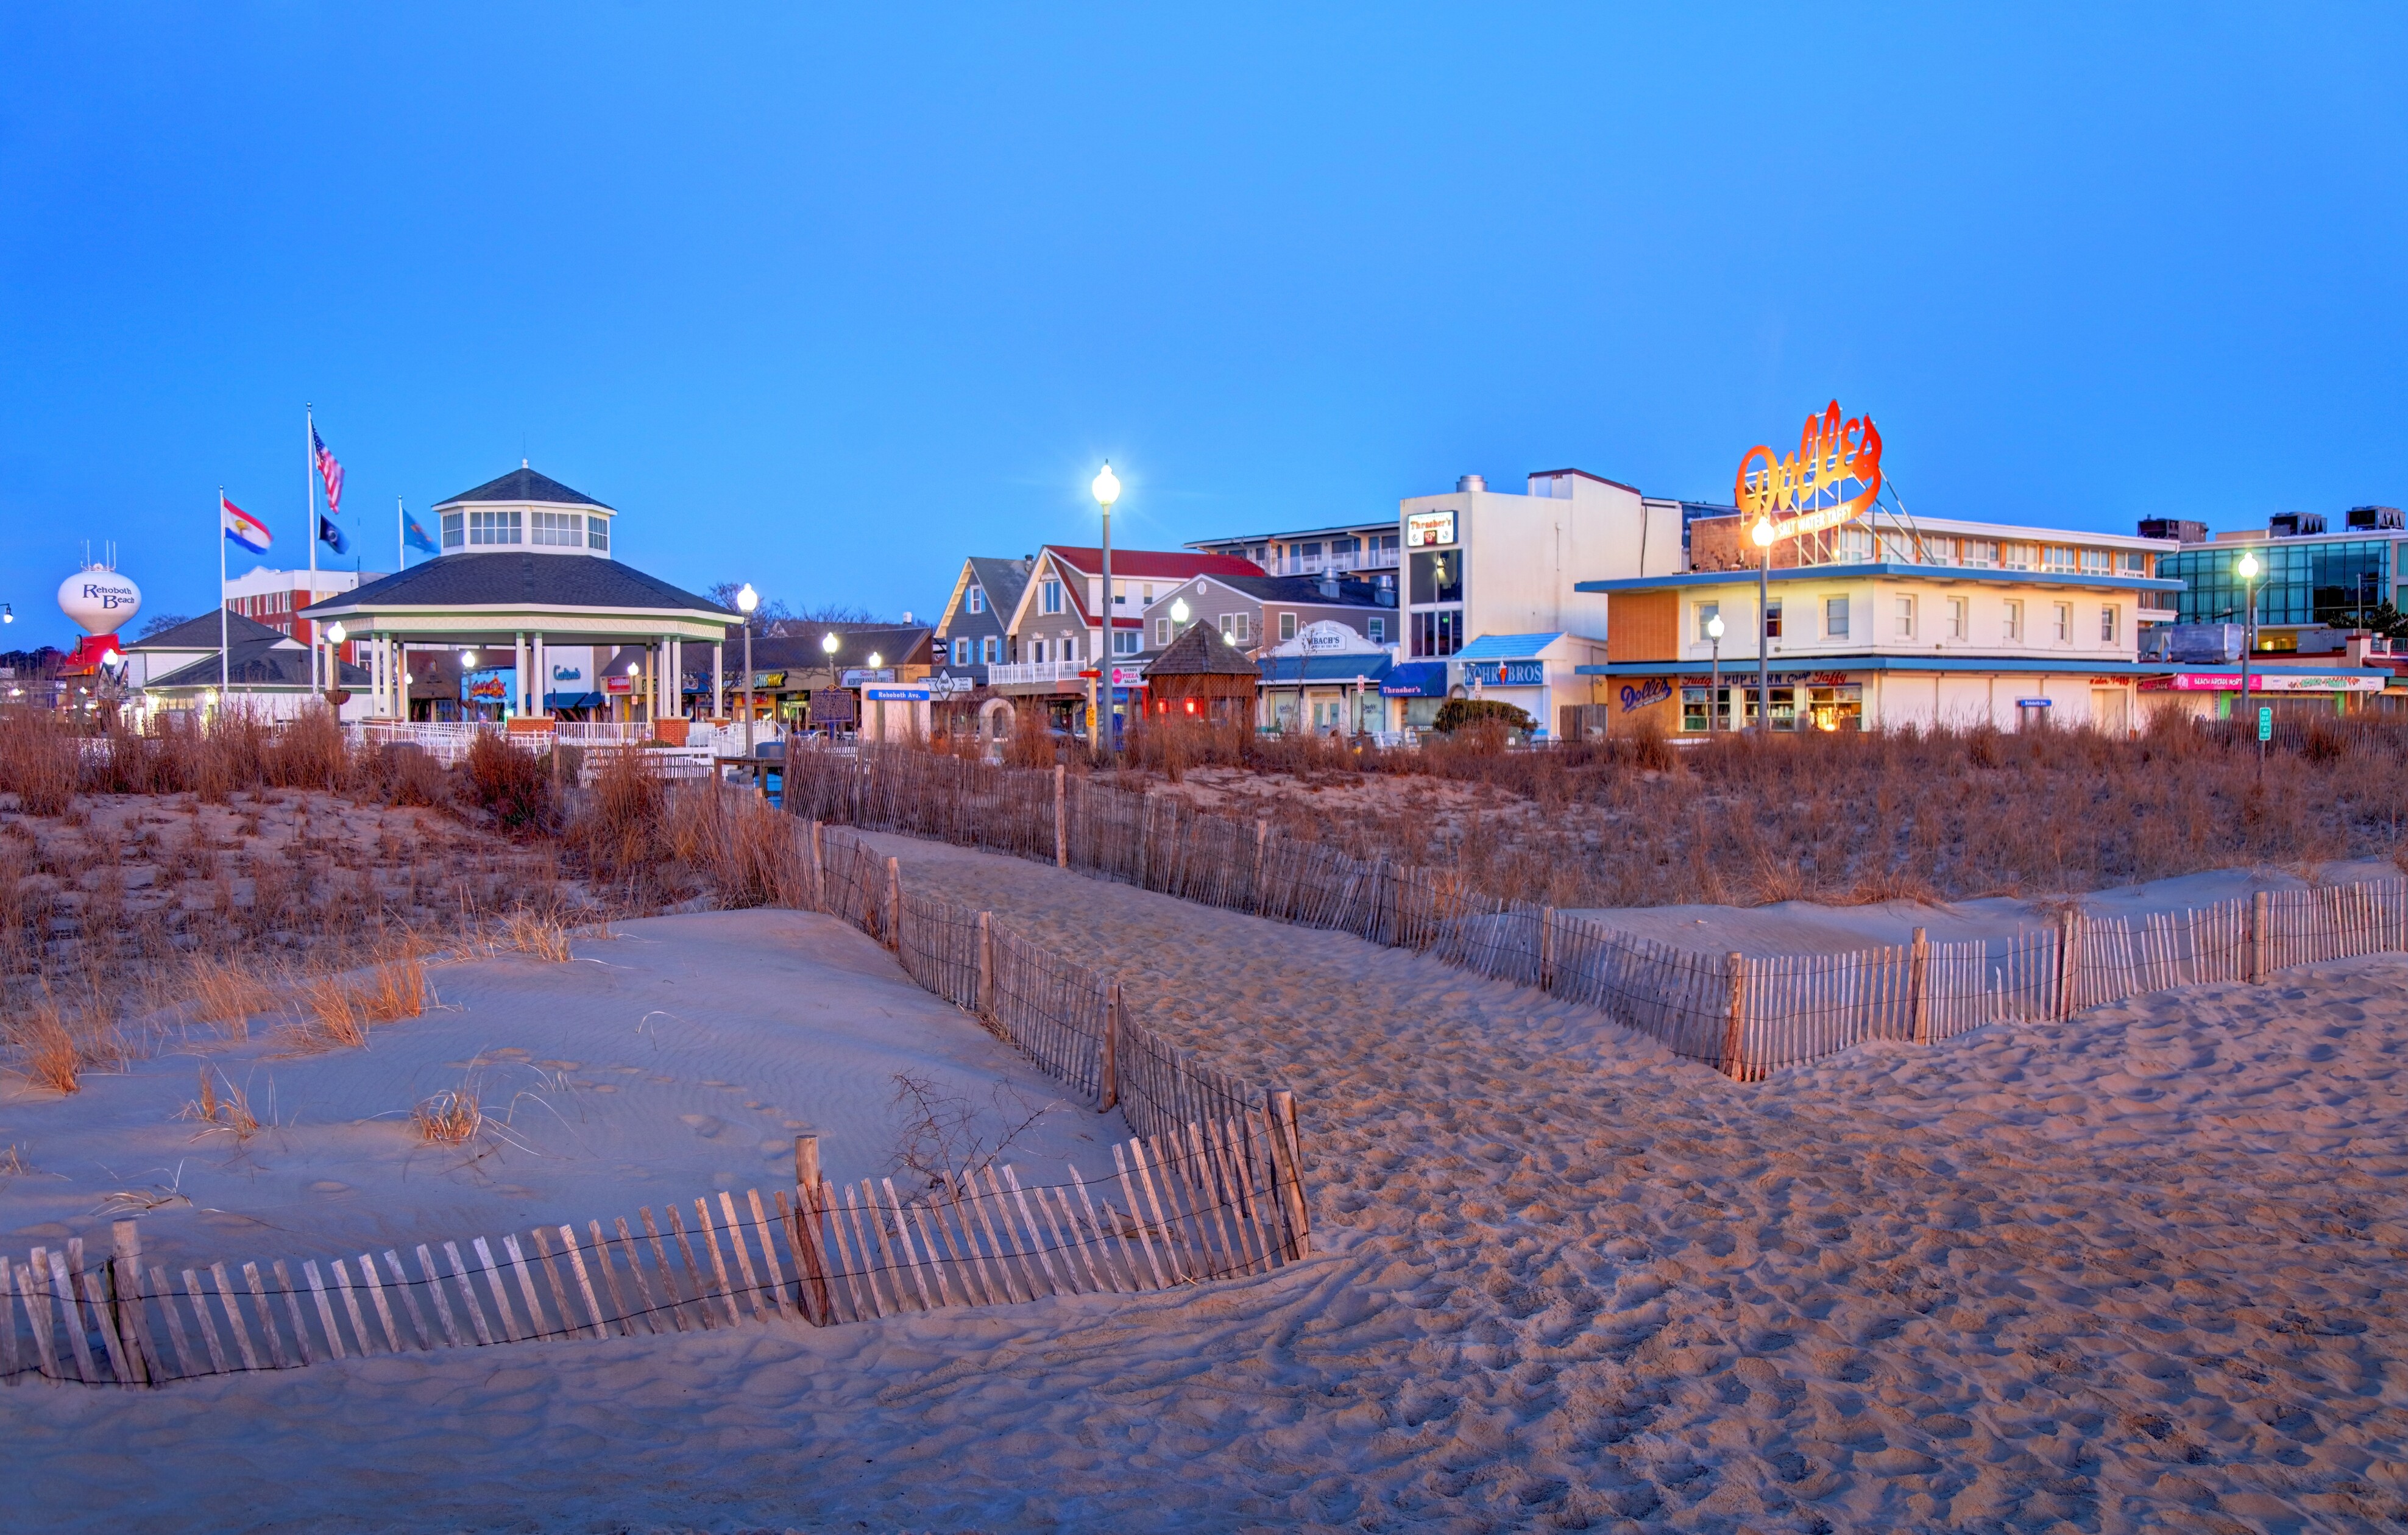 best beaches to visit in us in october